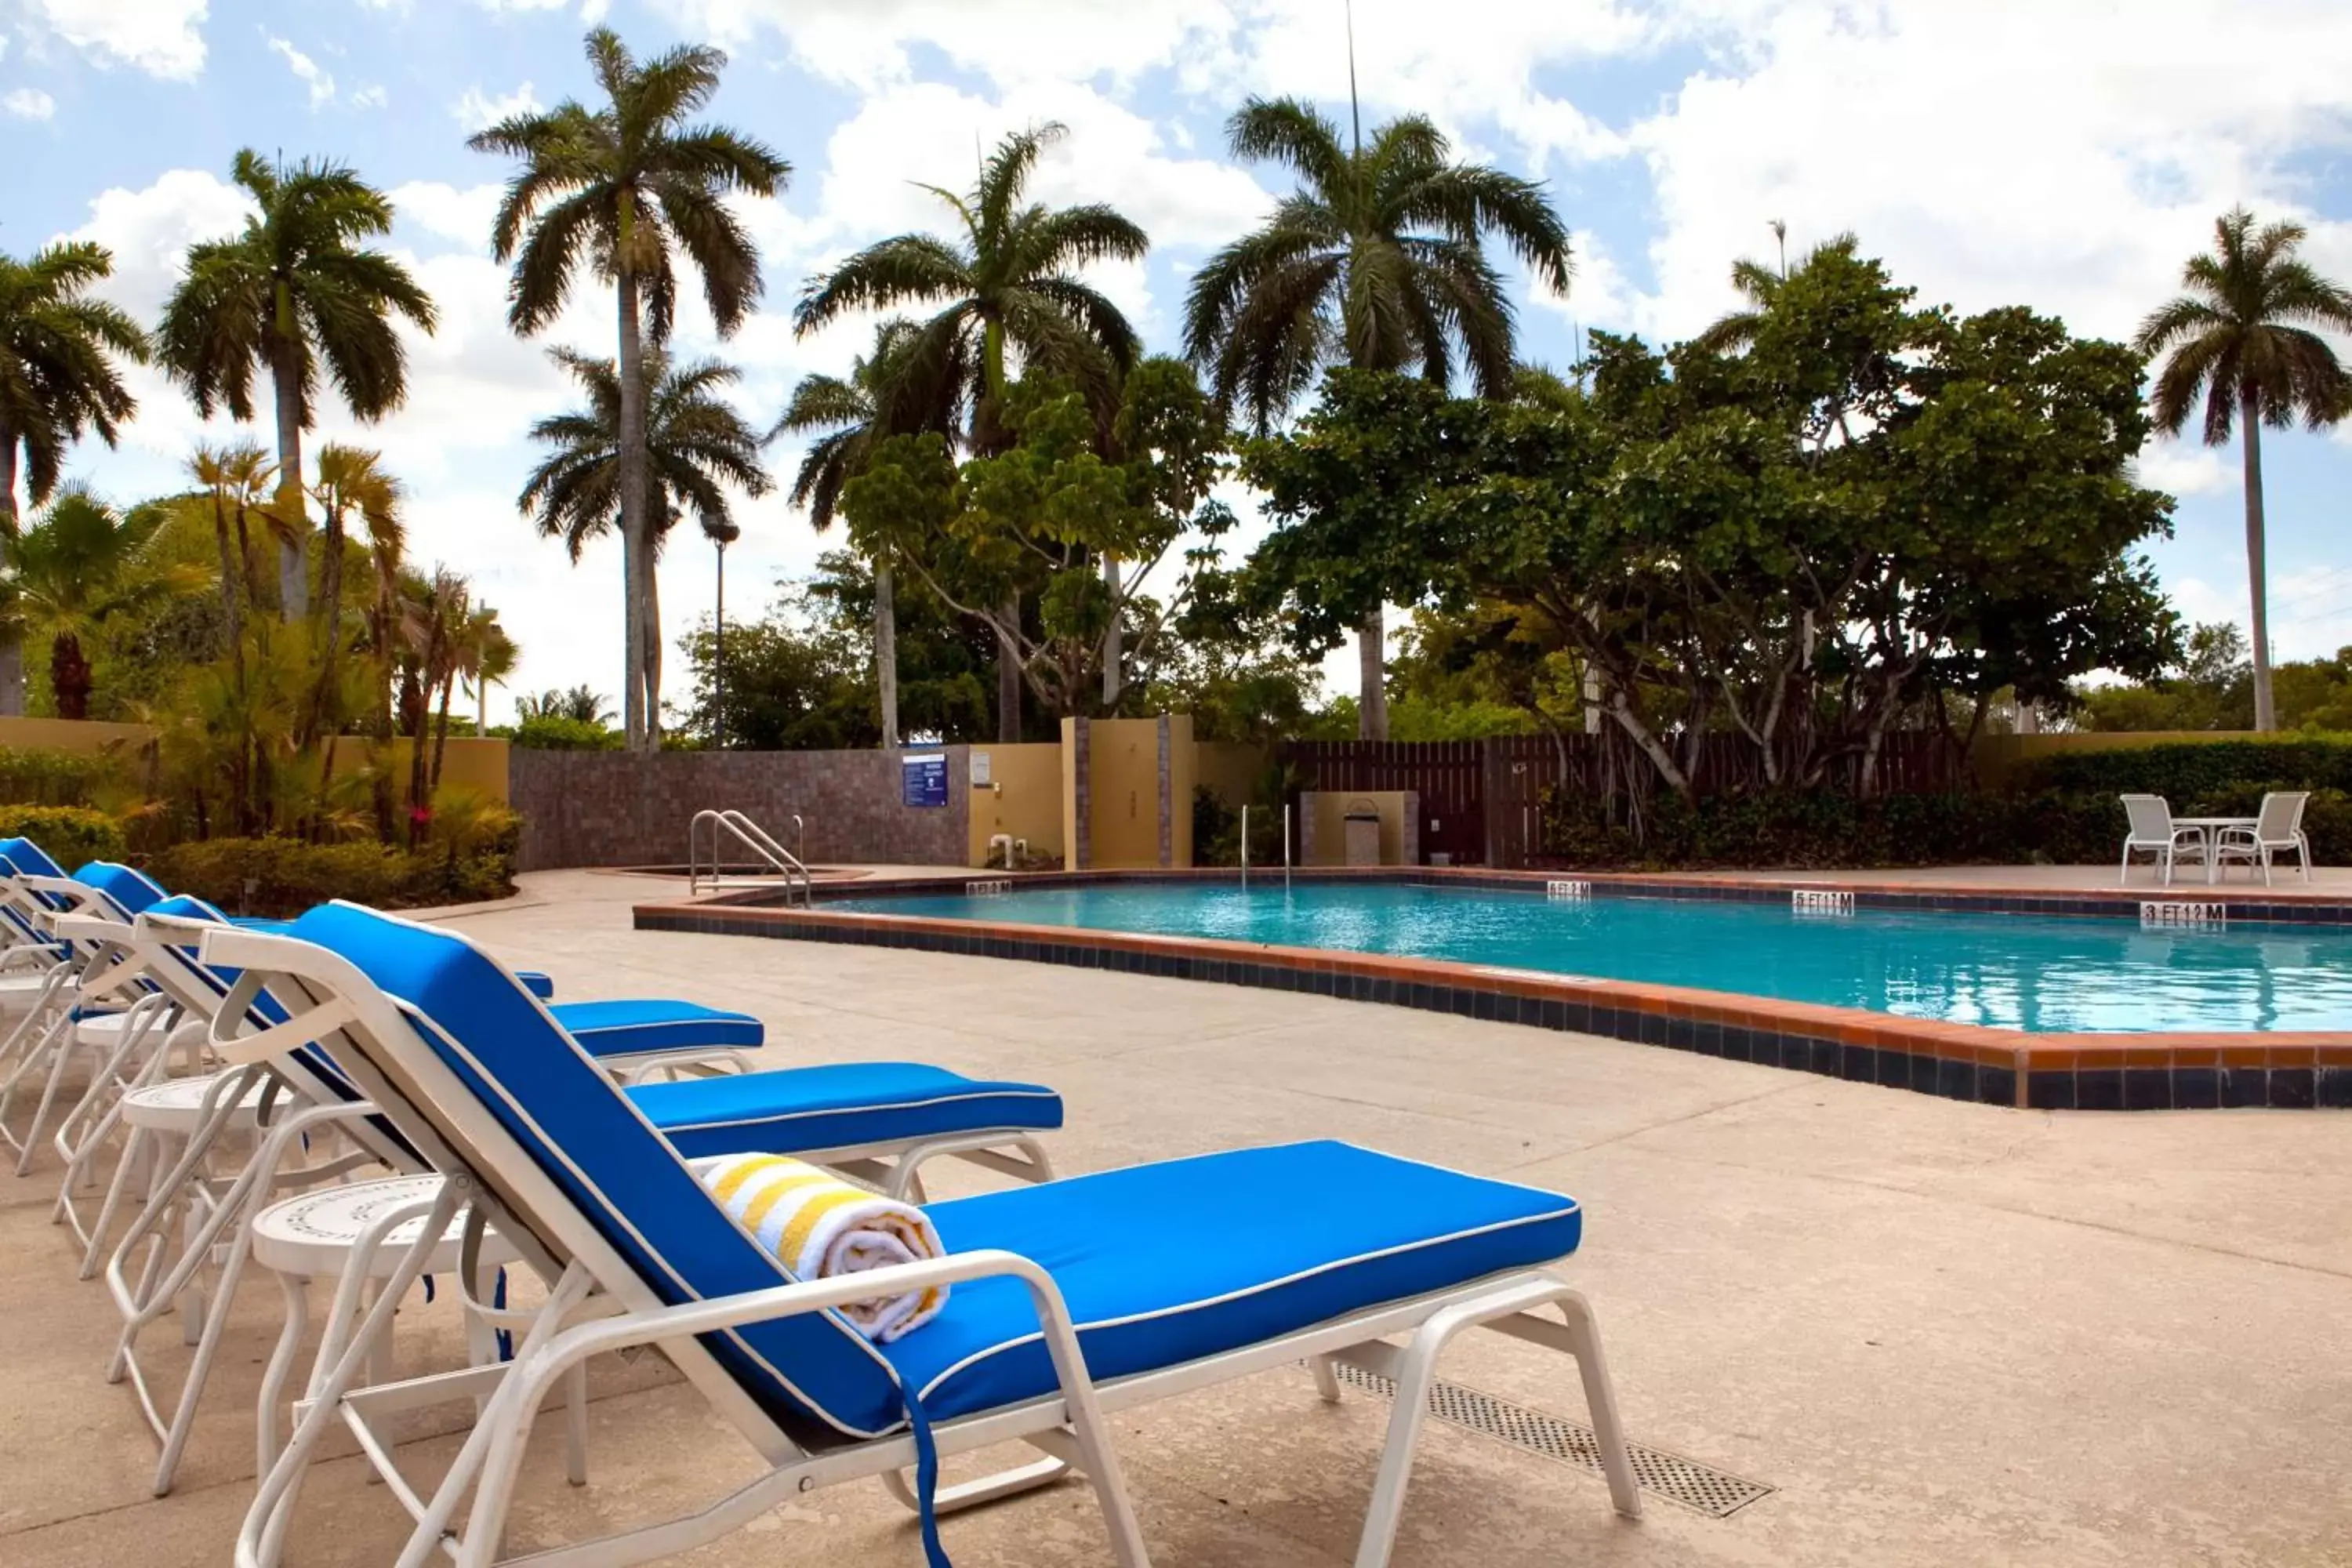 Property building, Swimming Pool in DoubleTree by Hilton Hotel Miami Airport & Convention Center